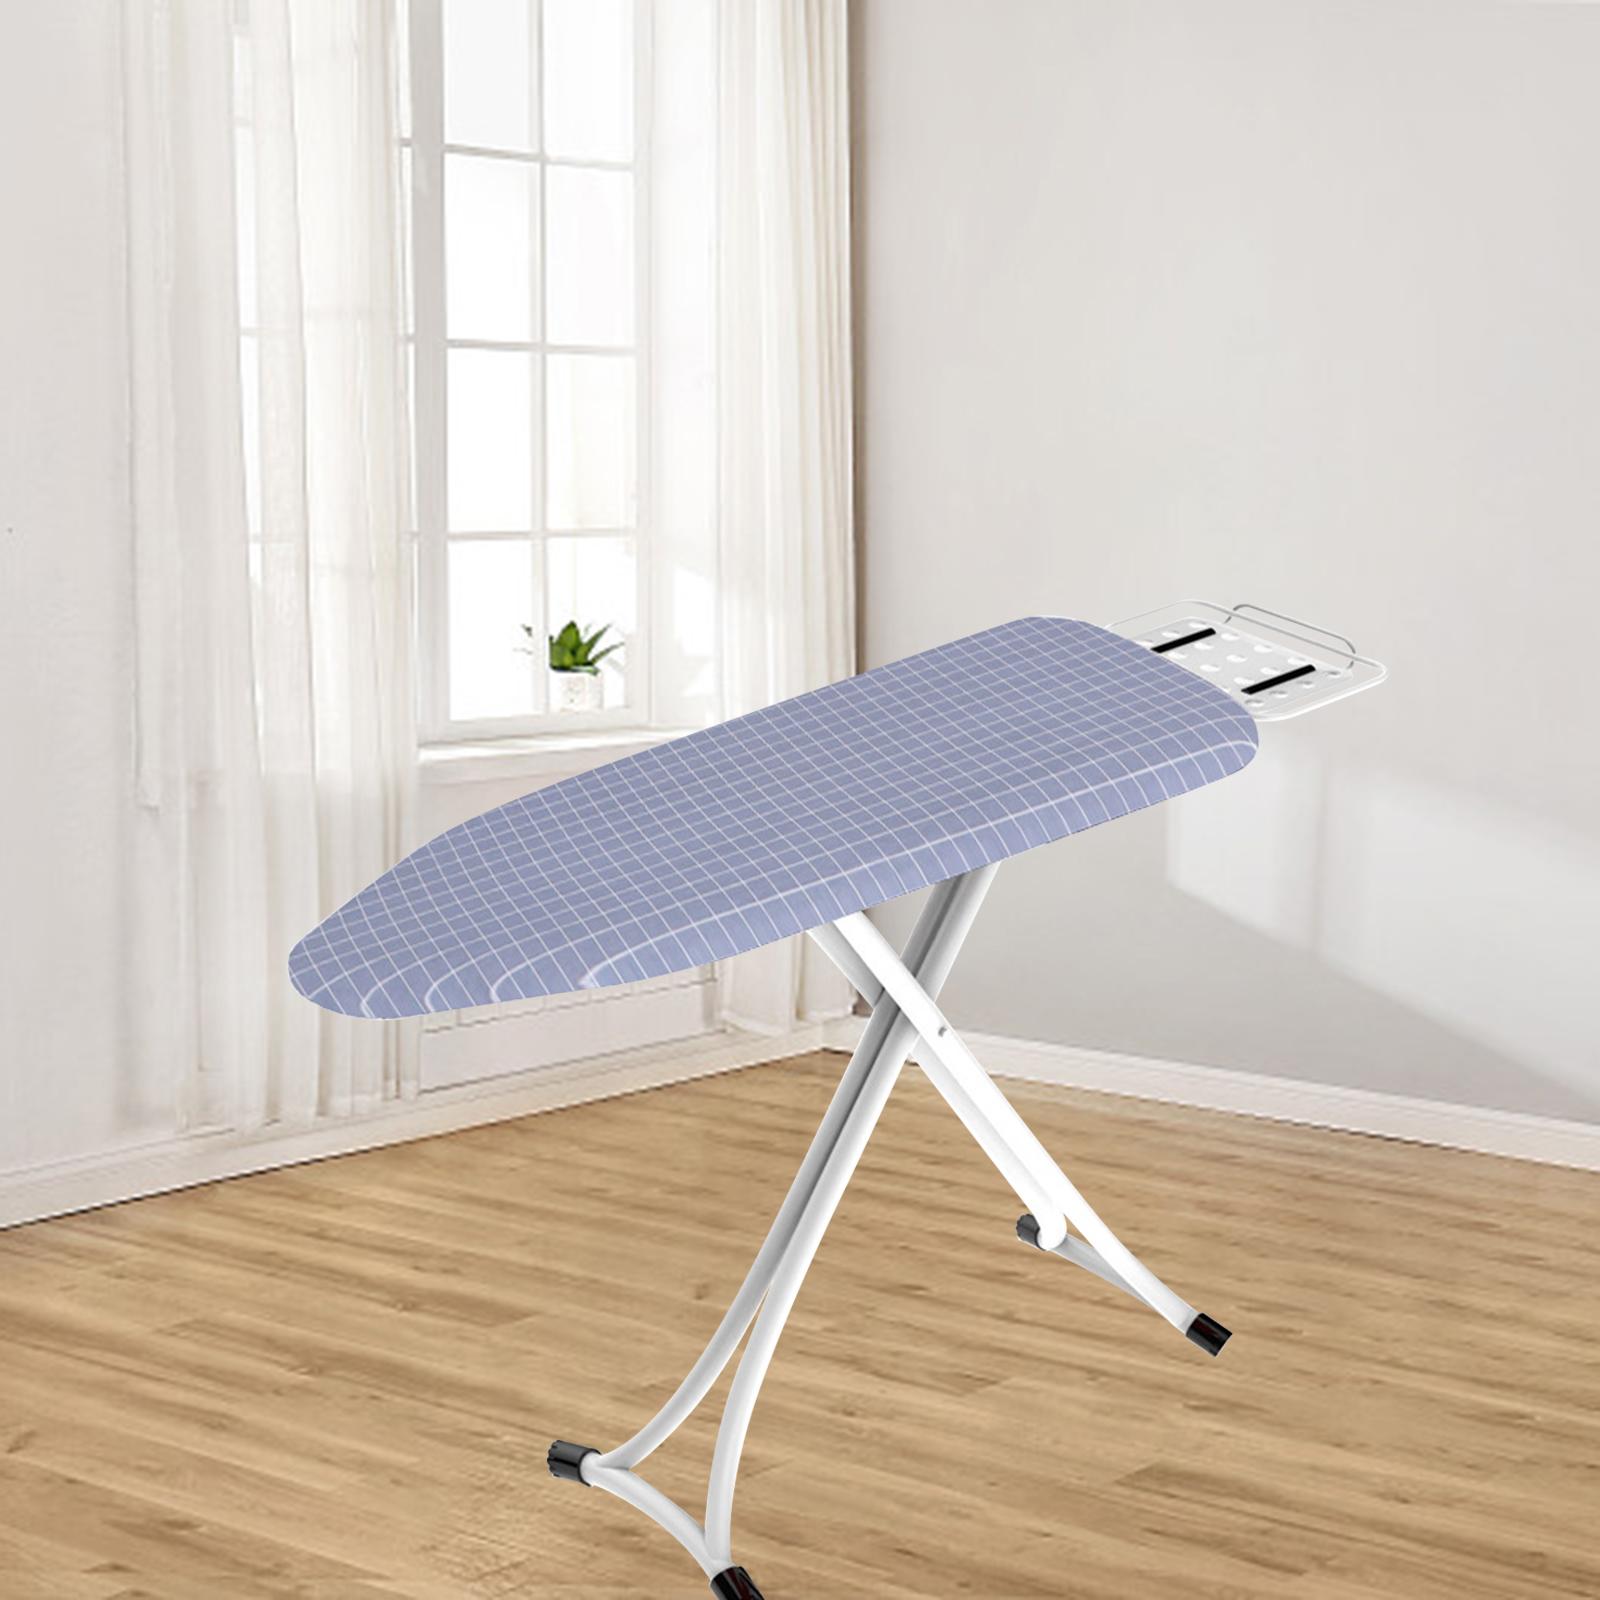 Ironing Table Cover Protector Stain Resistant Ironing Board Cover Laundry Supplies